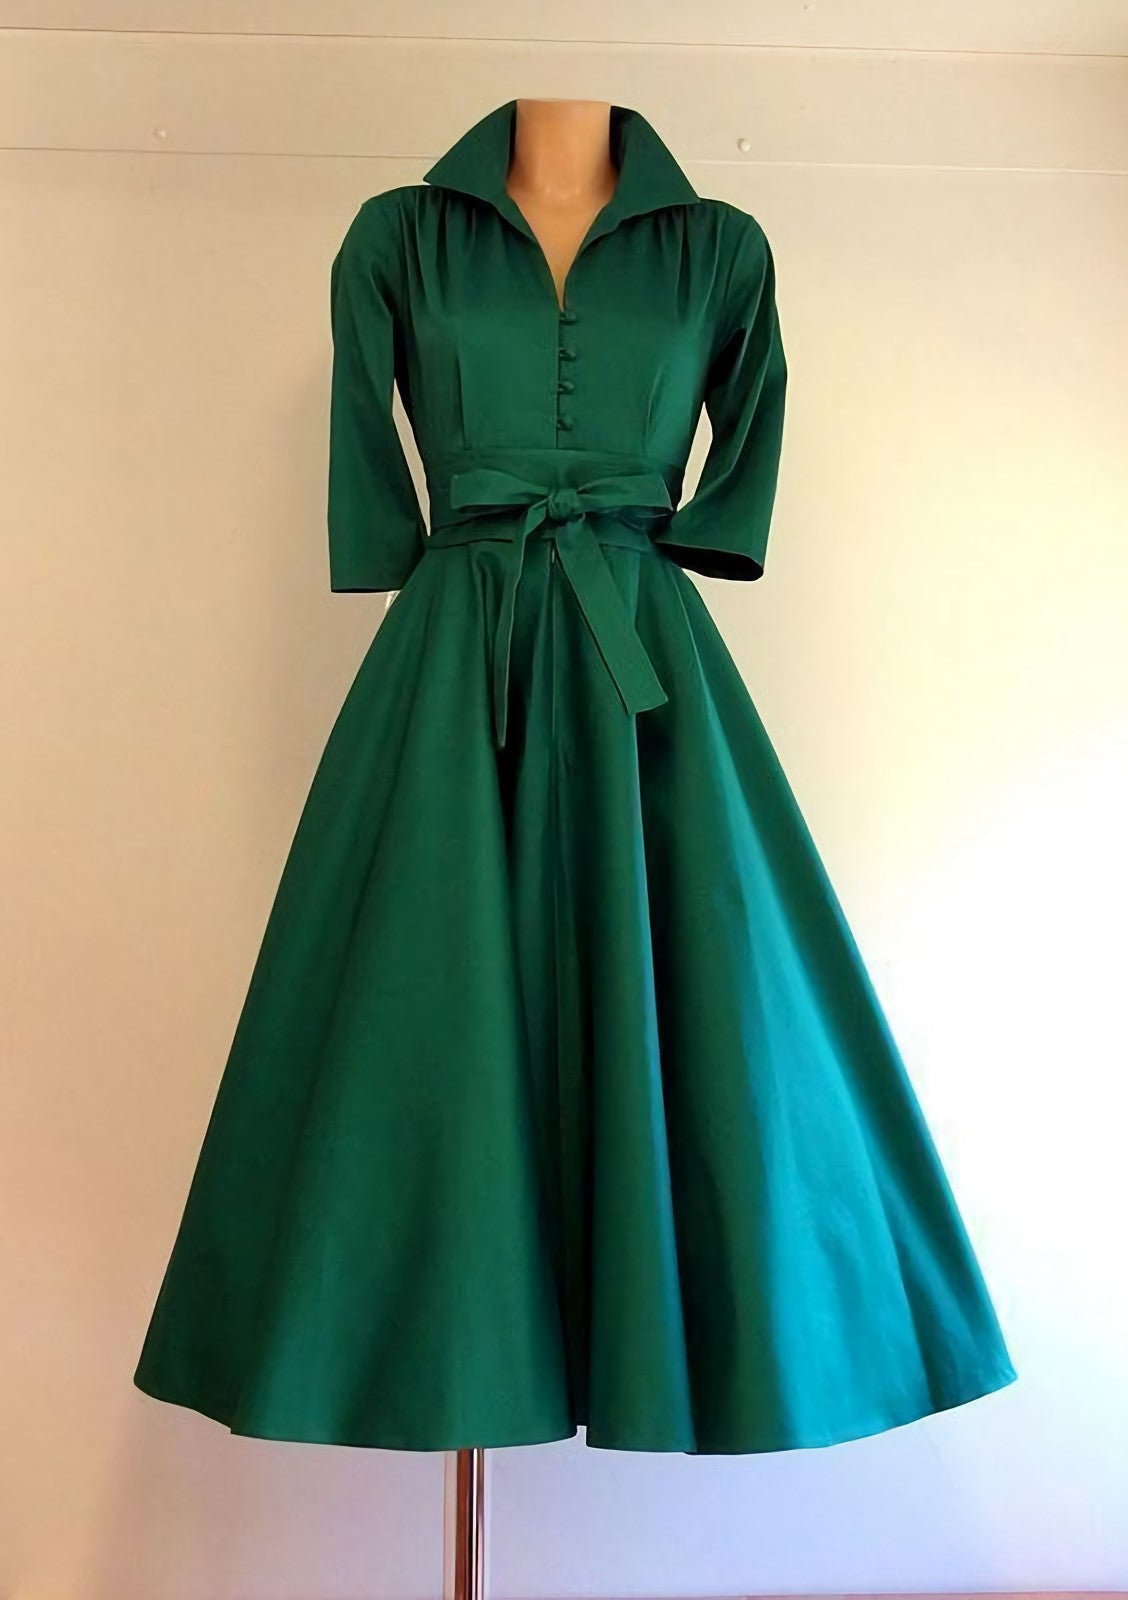 Amazing Green Knee Length Corset Homecoming Dress/4883 Gowns, Formal Dress Homecoming